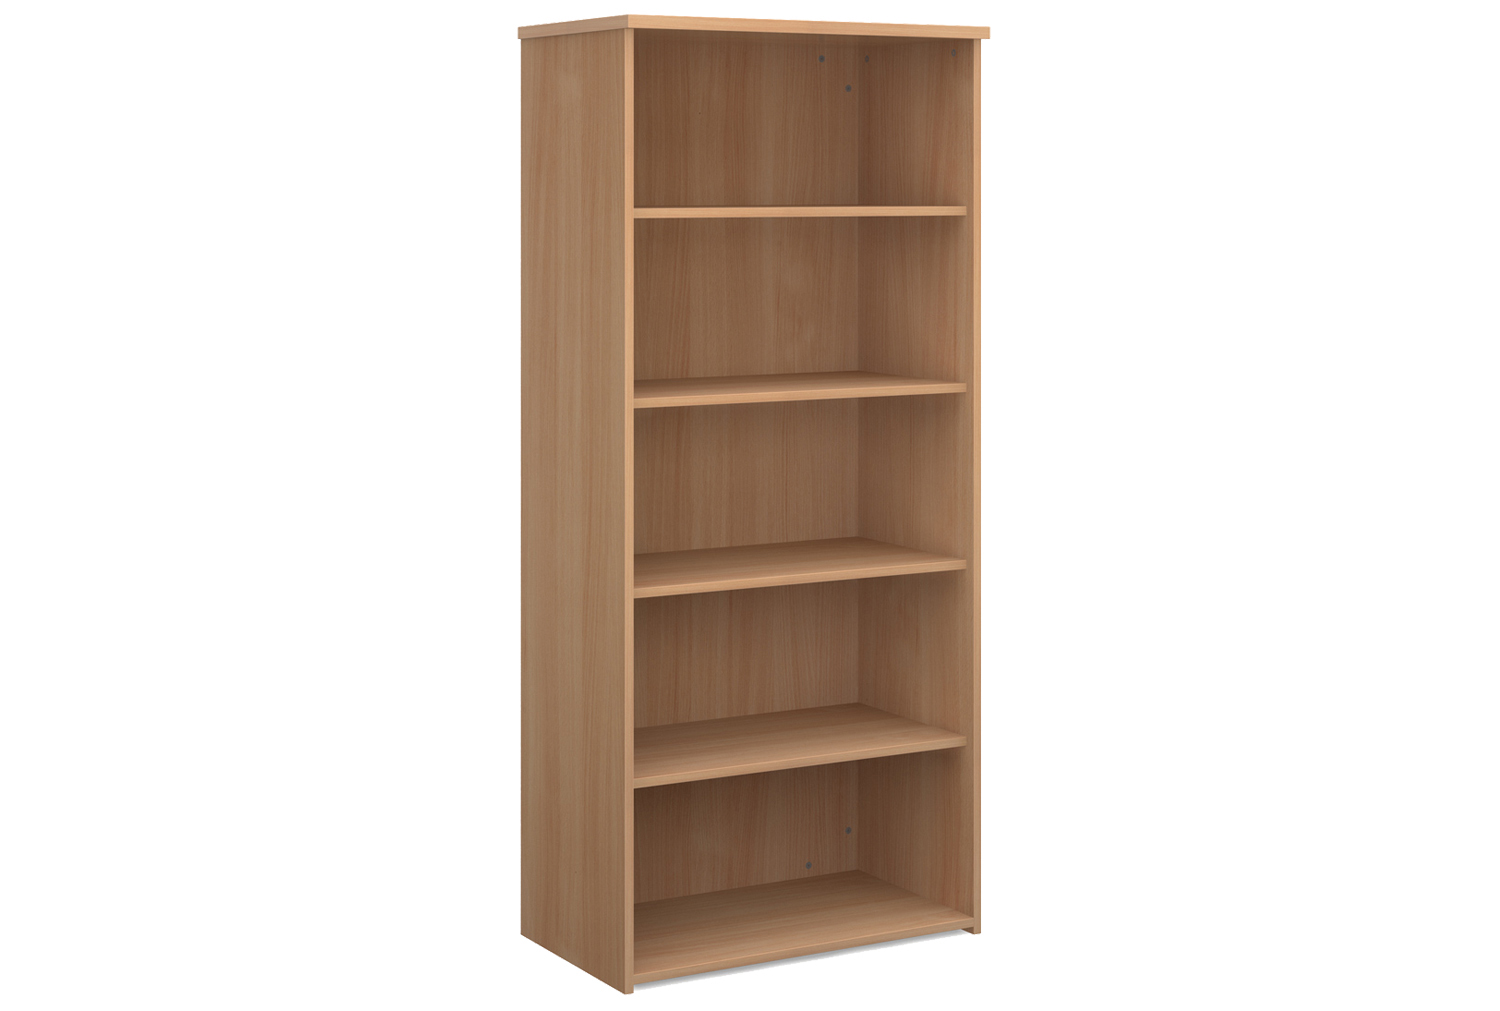 Tully Office Bookcases, 4 Shelf - 80wx47dx179h (cm), Beech